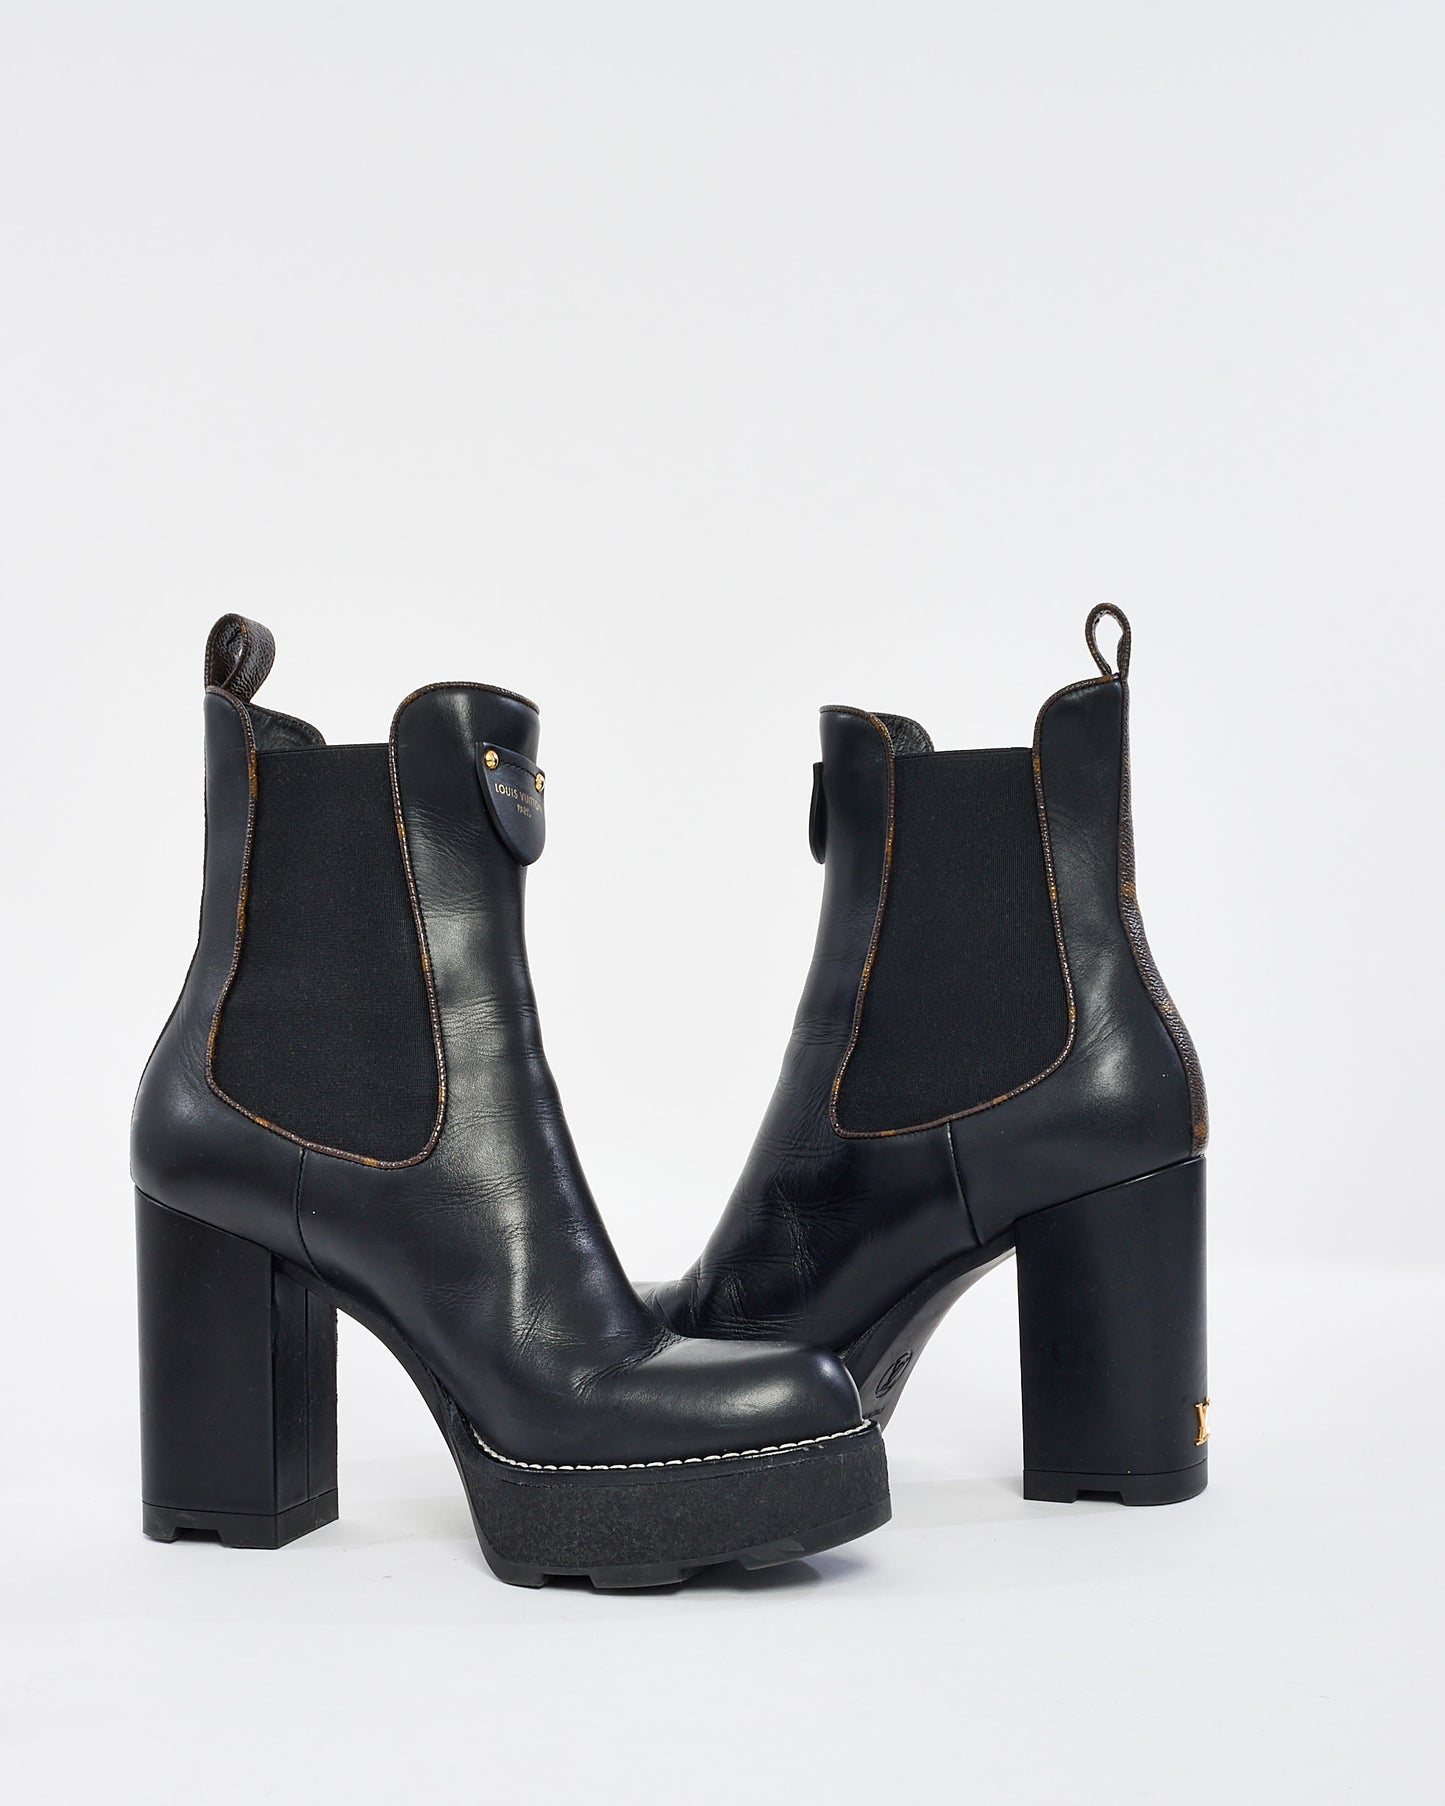 Louis Vuitton Black Leather & Monogram Beaubourg Heeled Ankle Boot - 39